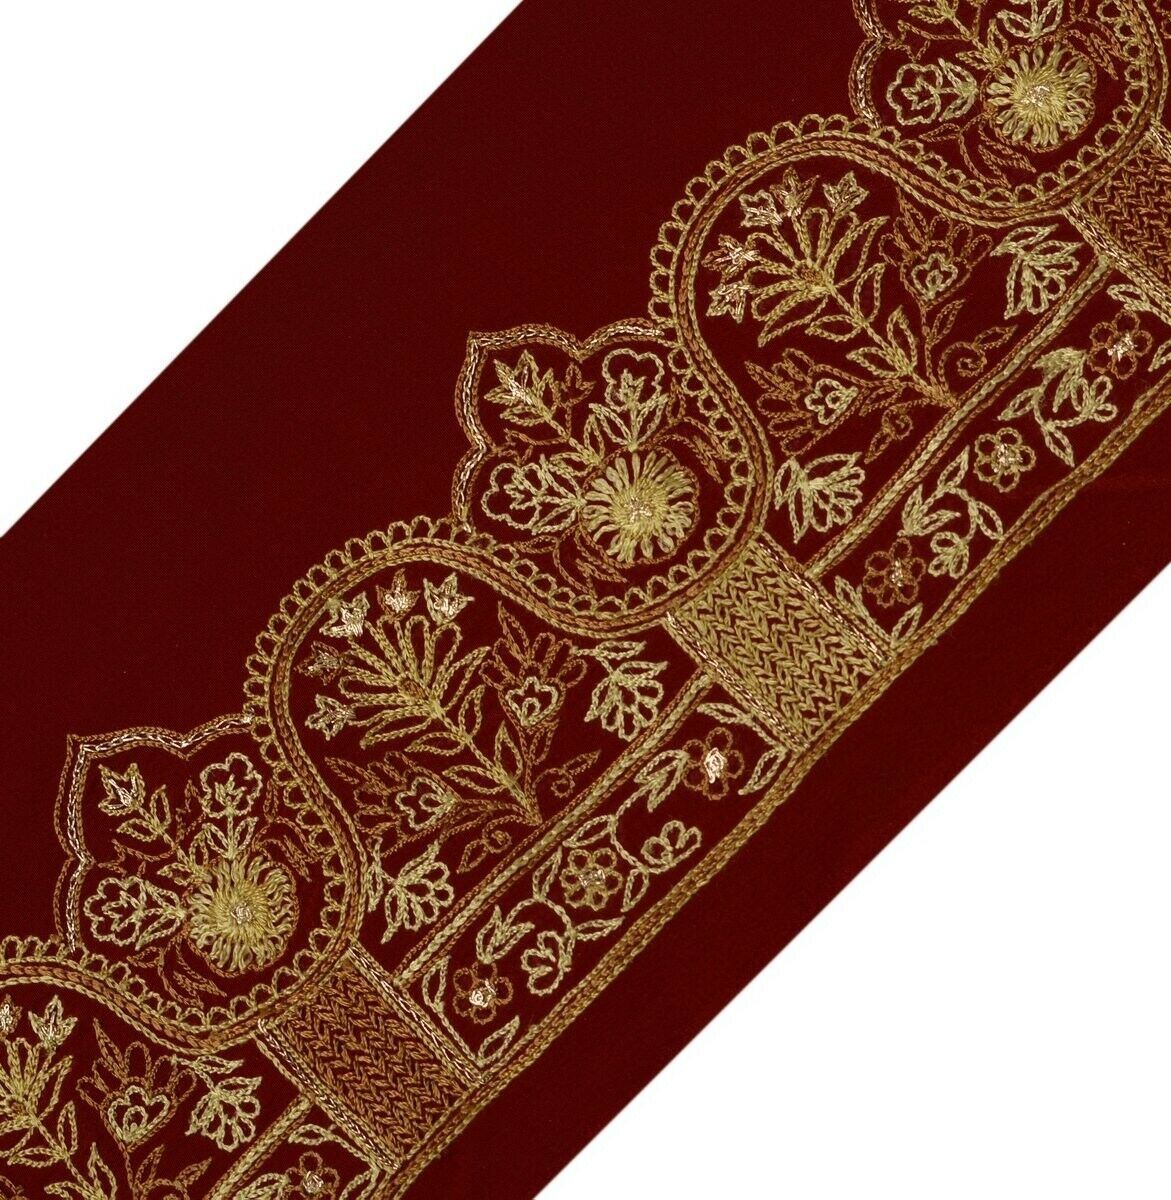 Vintage Saree Border Indian Craft Trim Hand Embroidered Maroon Ribbon Lace